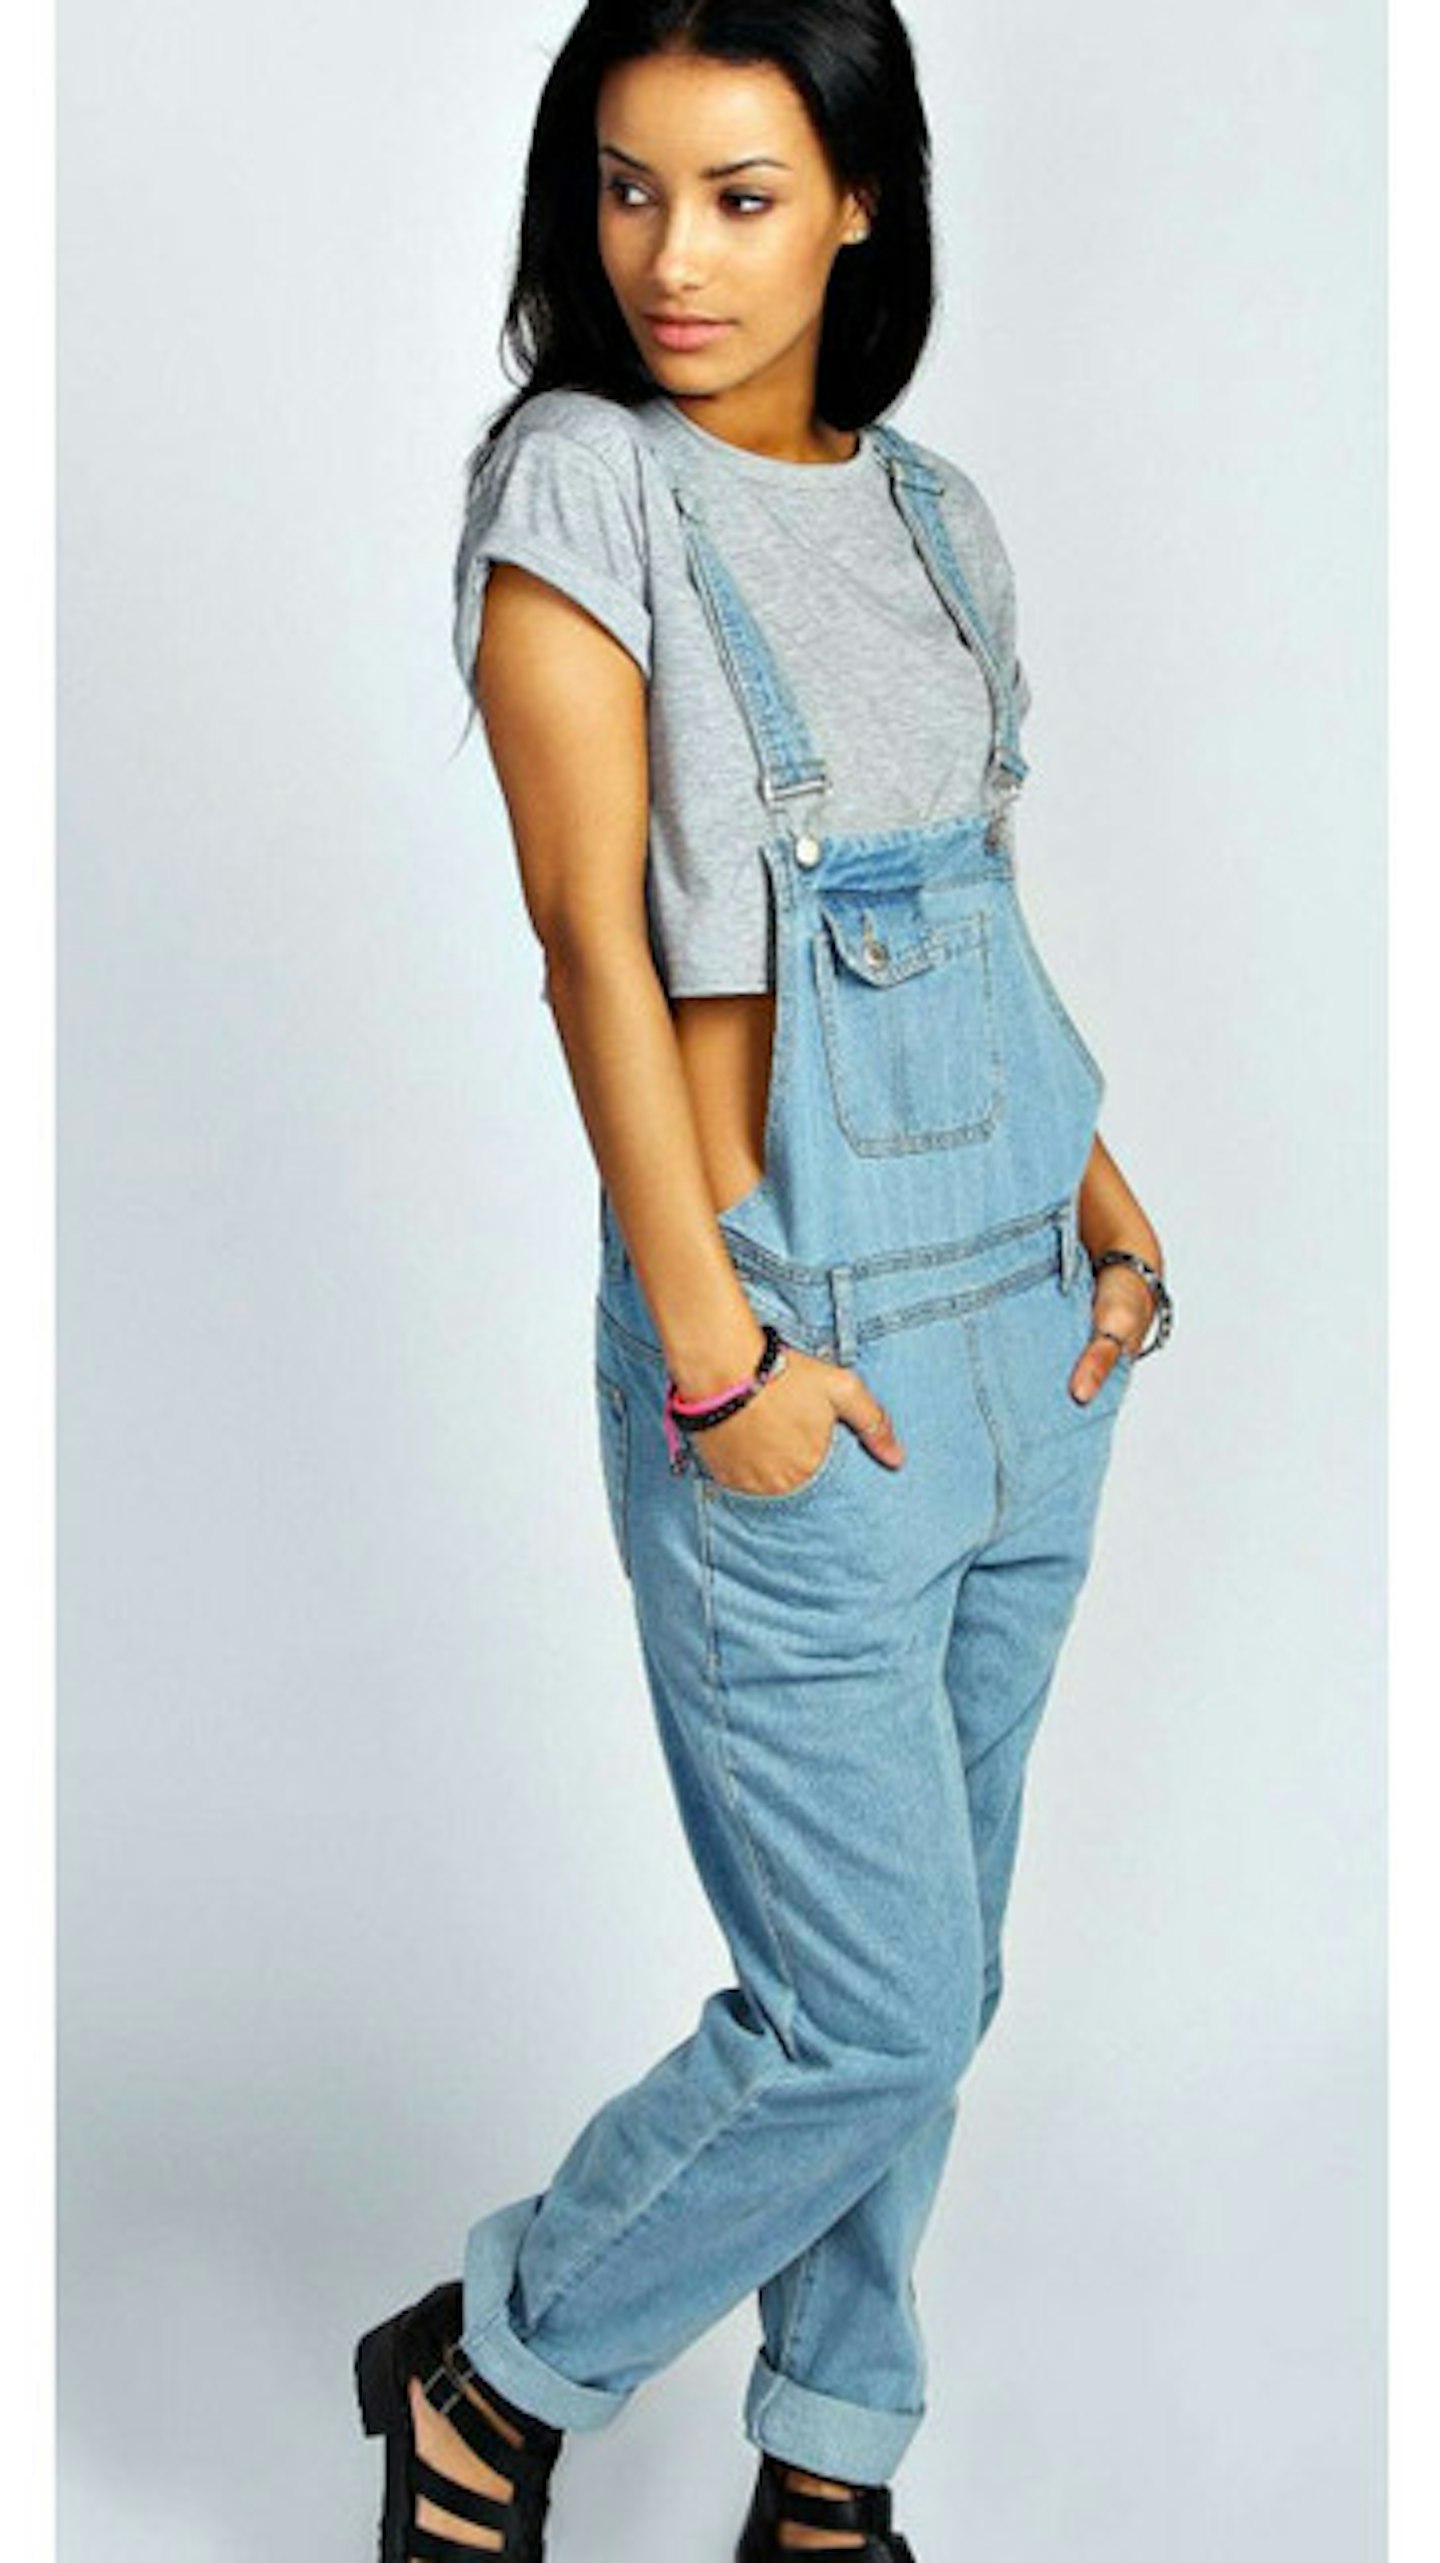 Dungarees and a crop top...